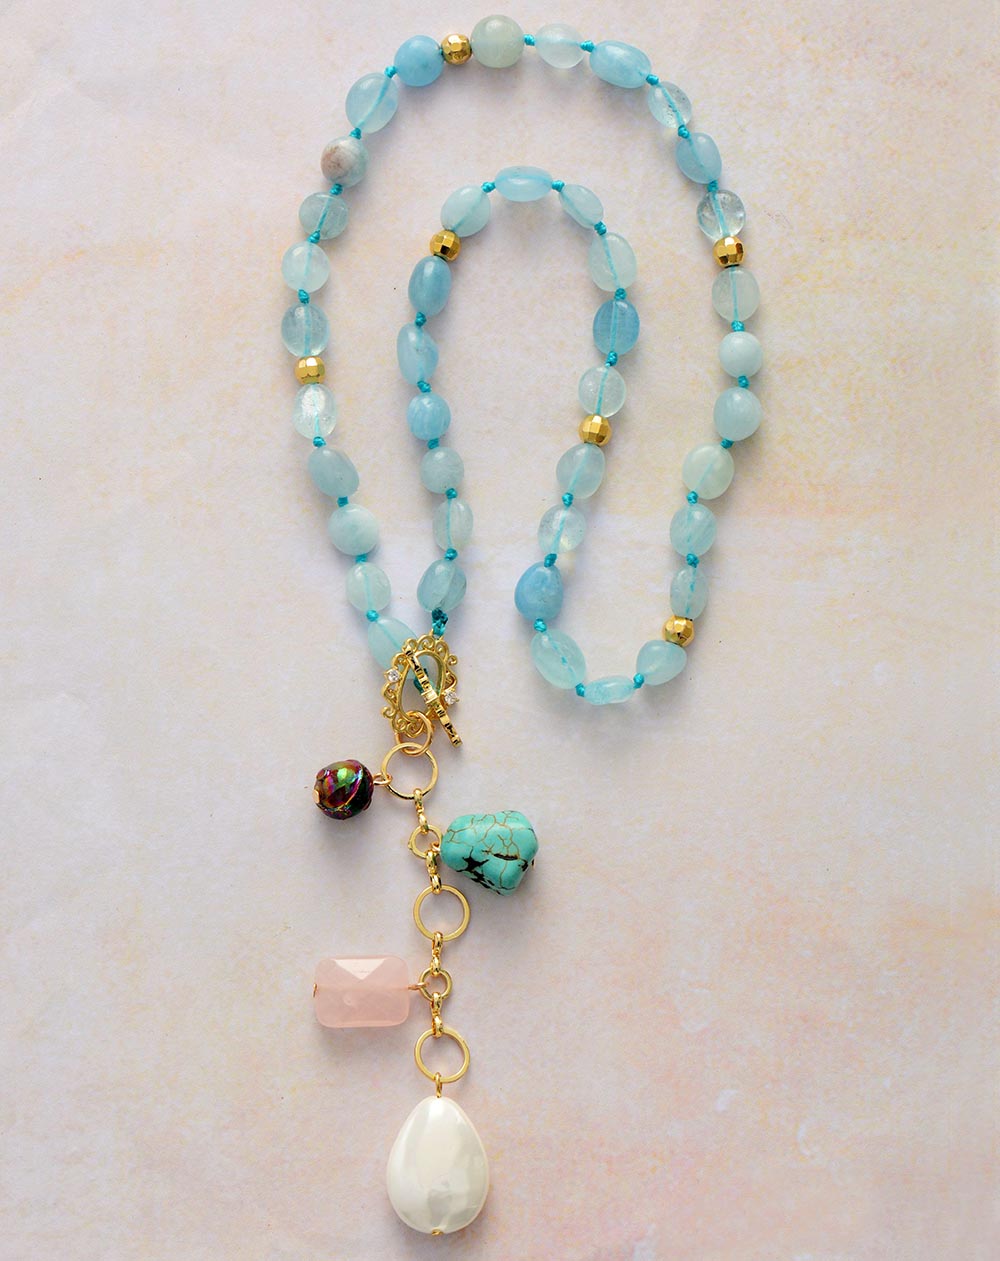 Handmade Aquamarine Necklace with Rose Quartz, Turquoise and Shell Pearl Pendants